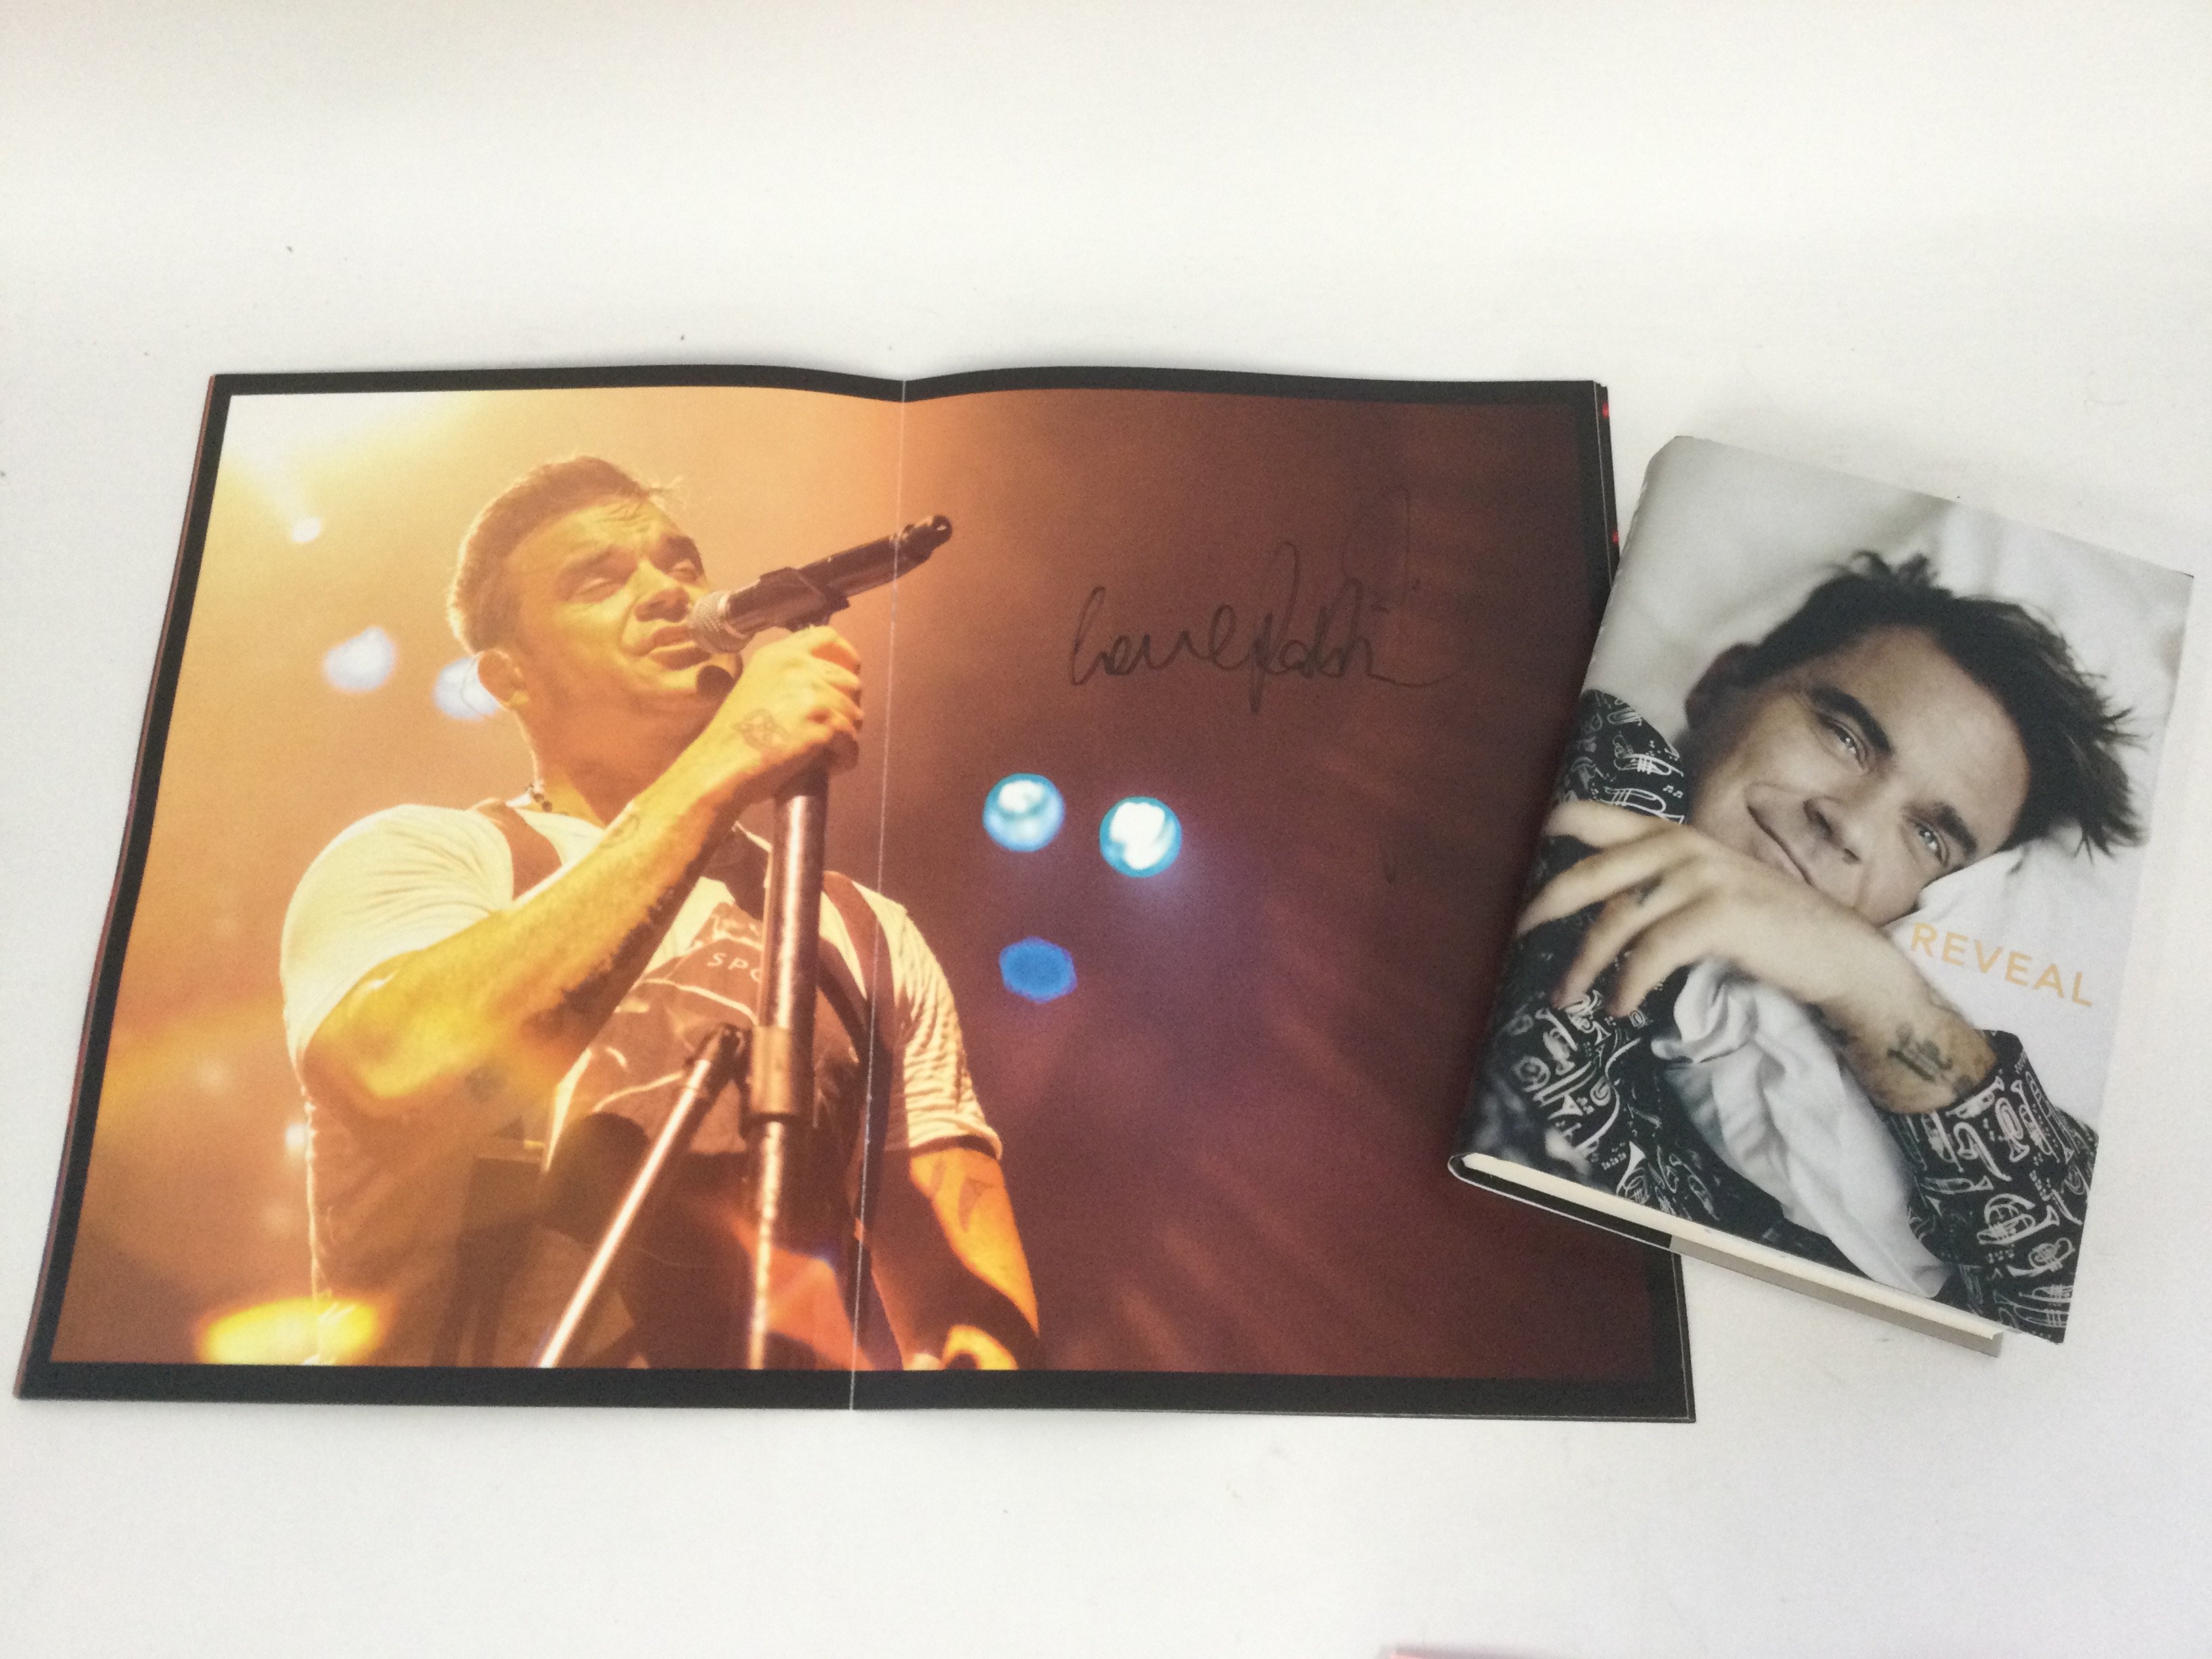 A signed Robbie Williams book 'Reveal' together wi